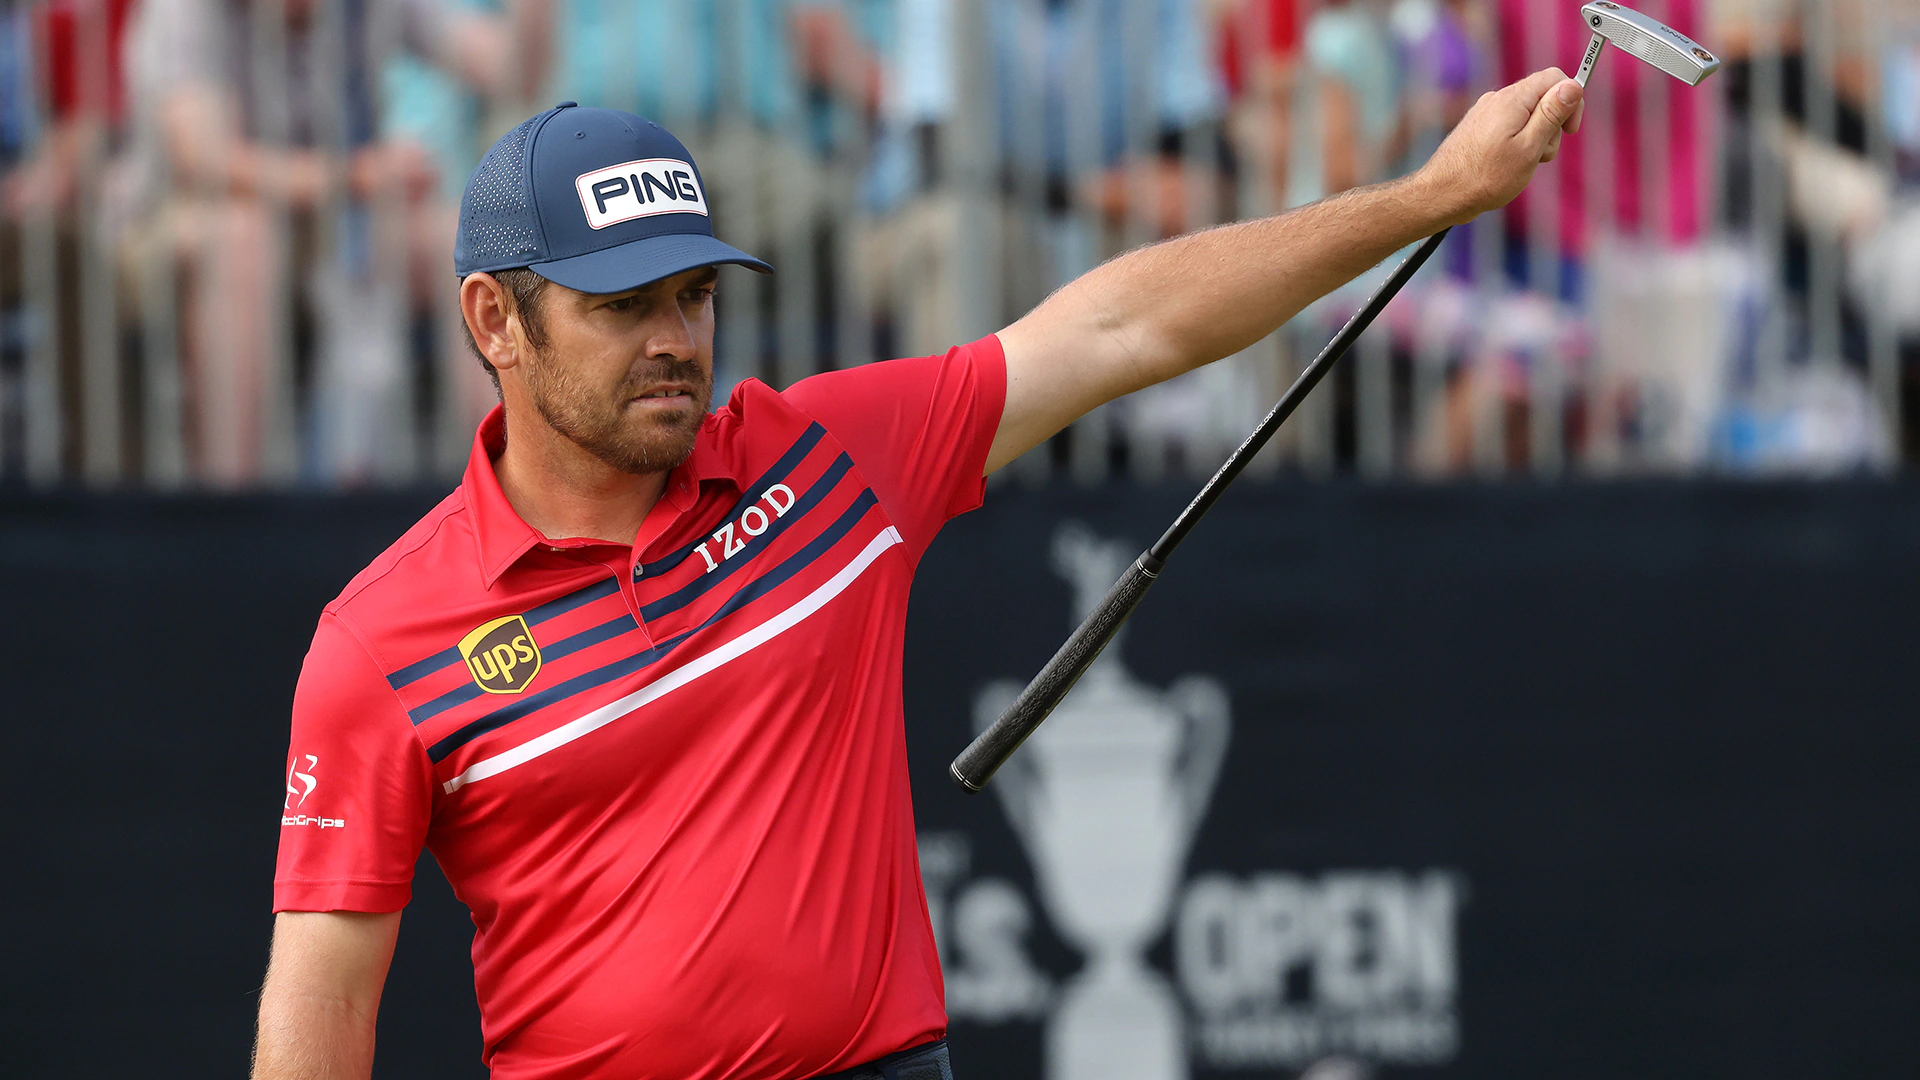 New Olympic WDs: Sergio Garcia, Tyrrell Hatton and Louis Oosthuizen